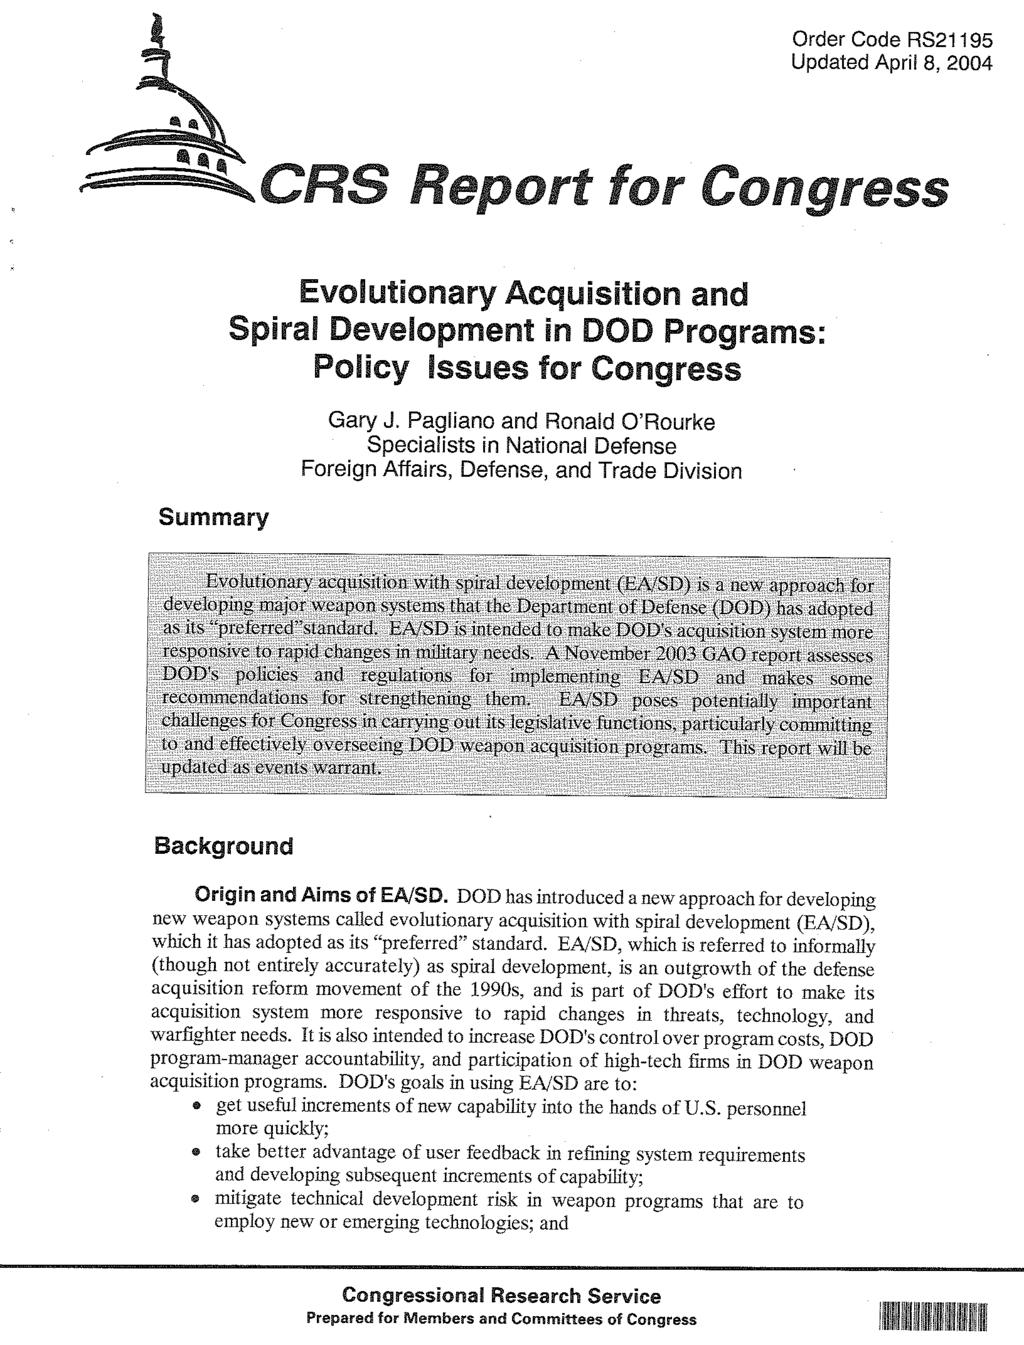 Order Code RS21195 Updated April 8, 2004 Summary Evolutionary Acquisition an Spiral Development in Programs : Policy Issues for Congress Gary J.